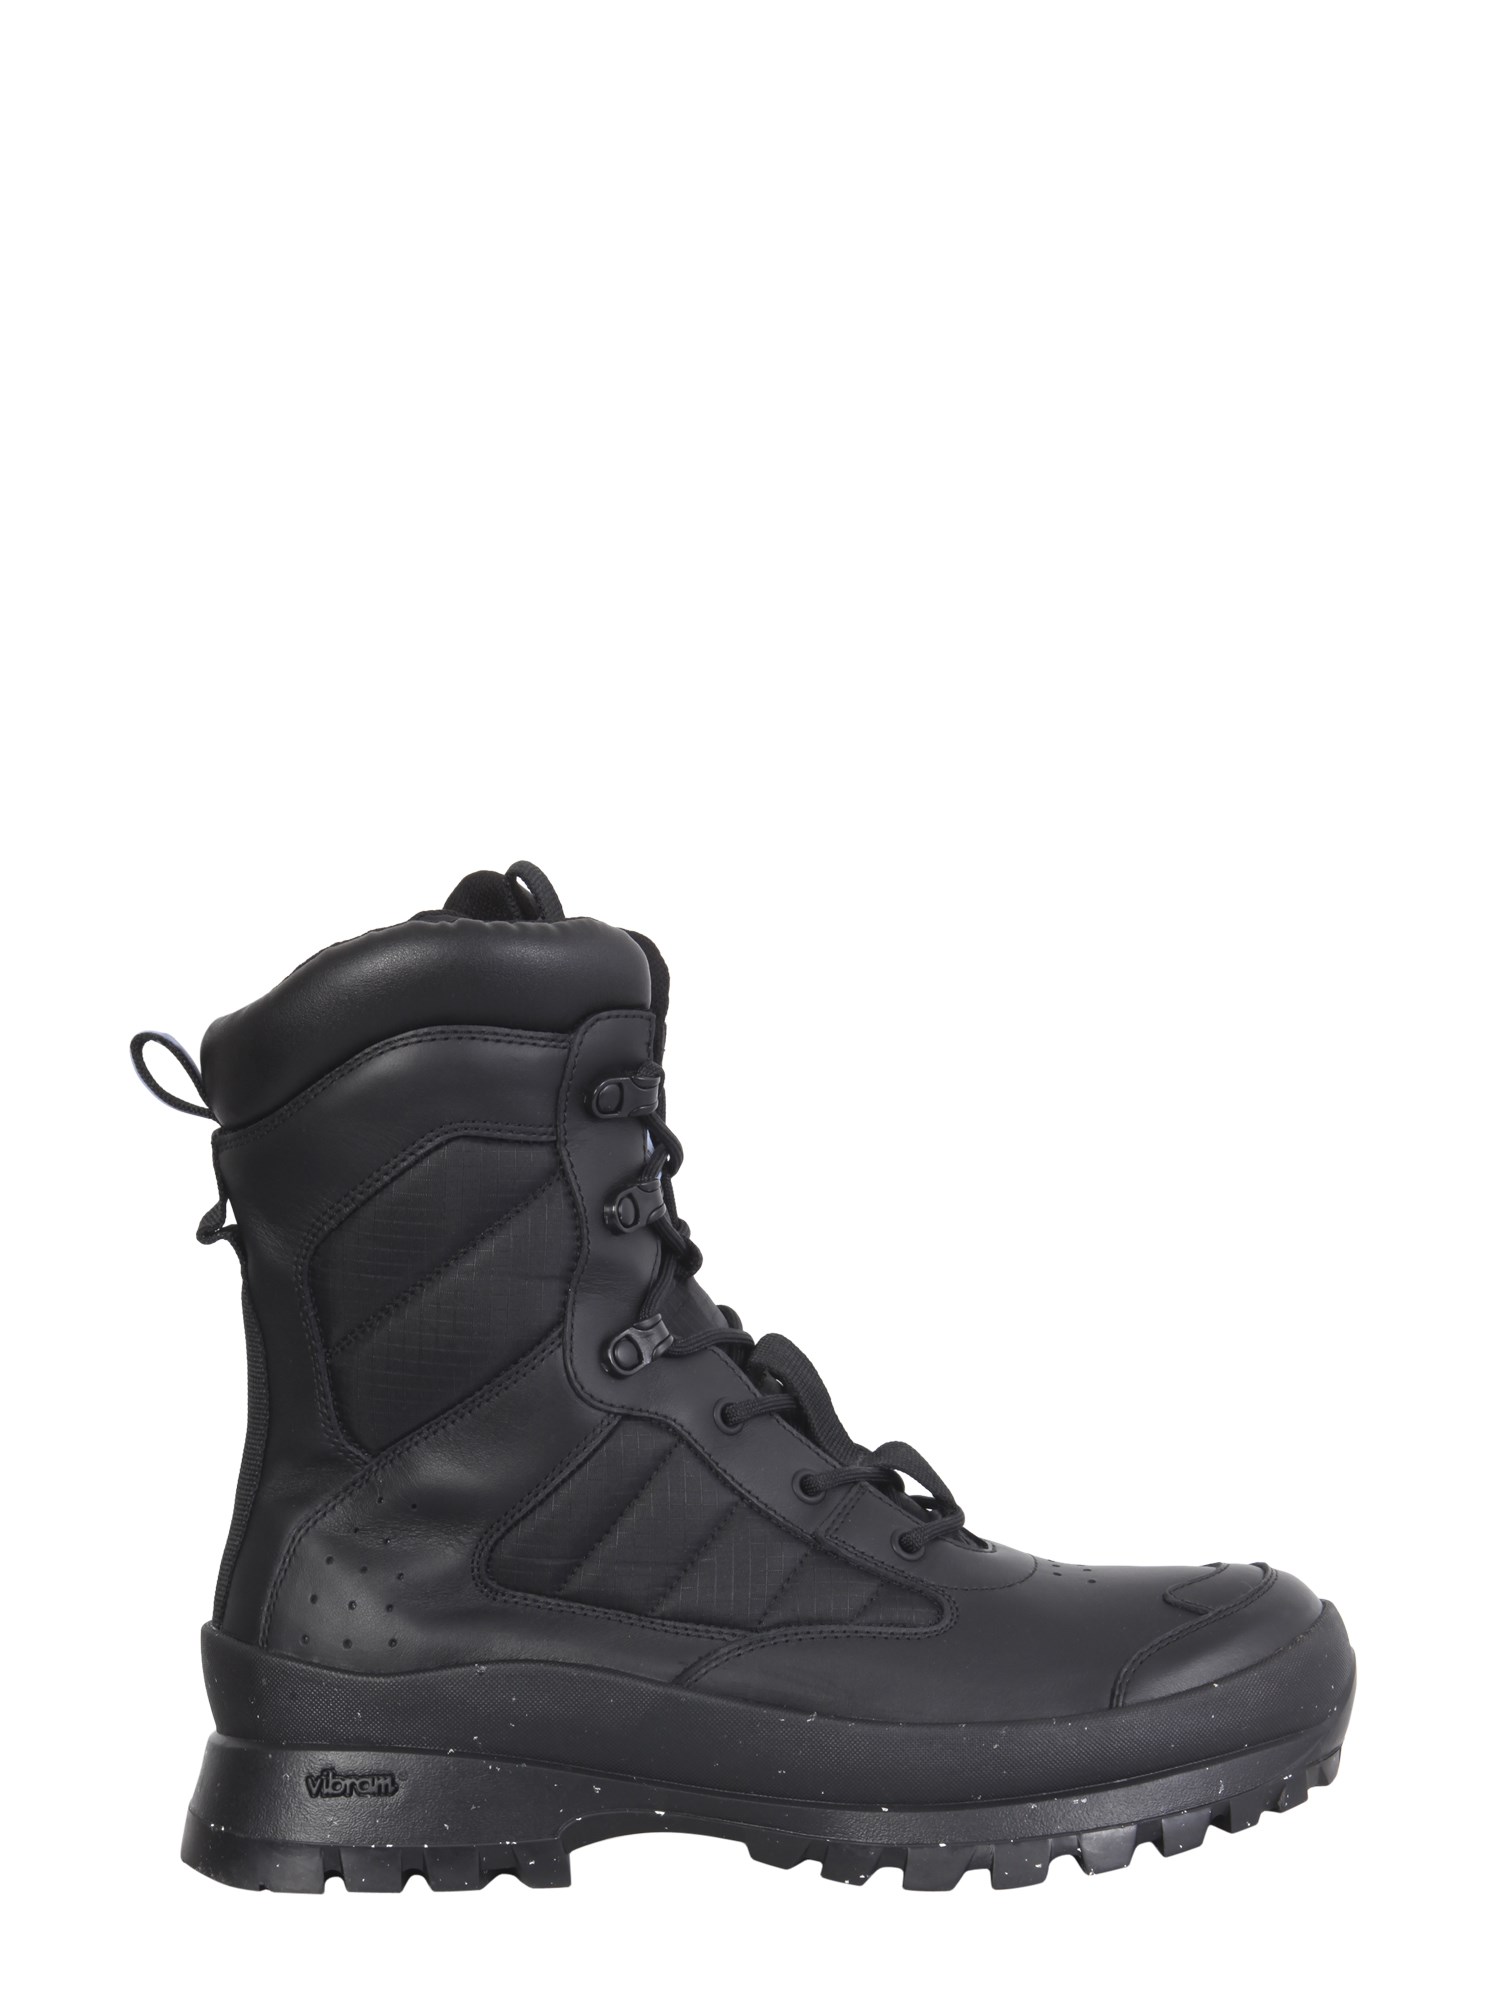 mcq in-8 tactical boots